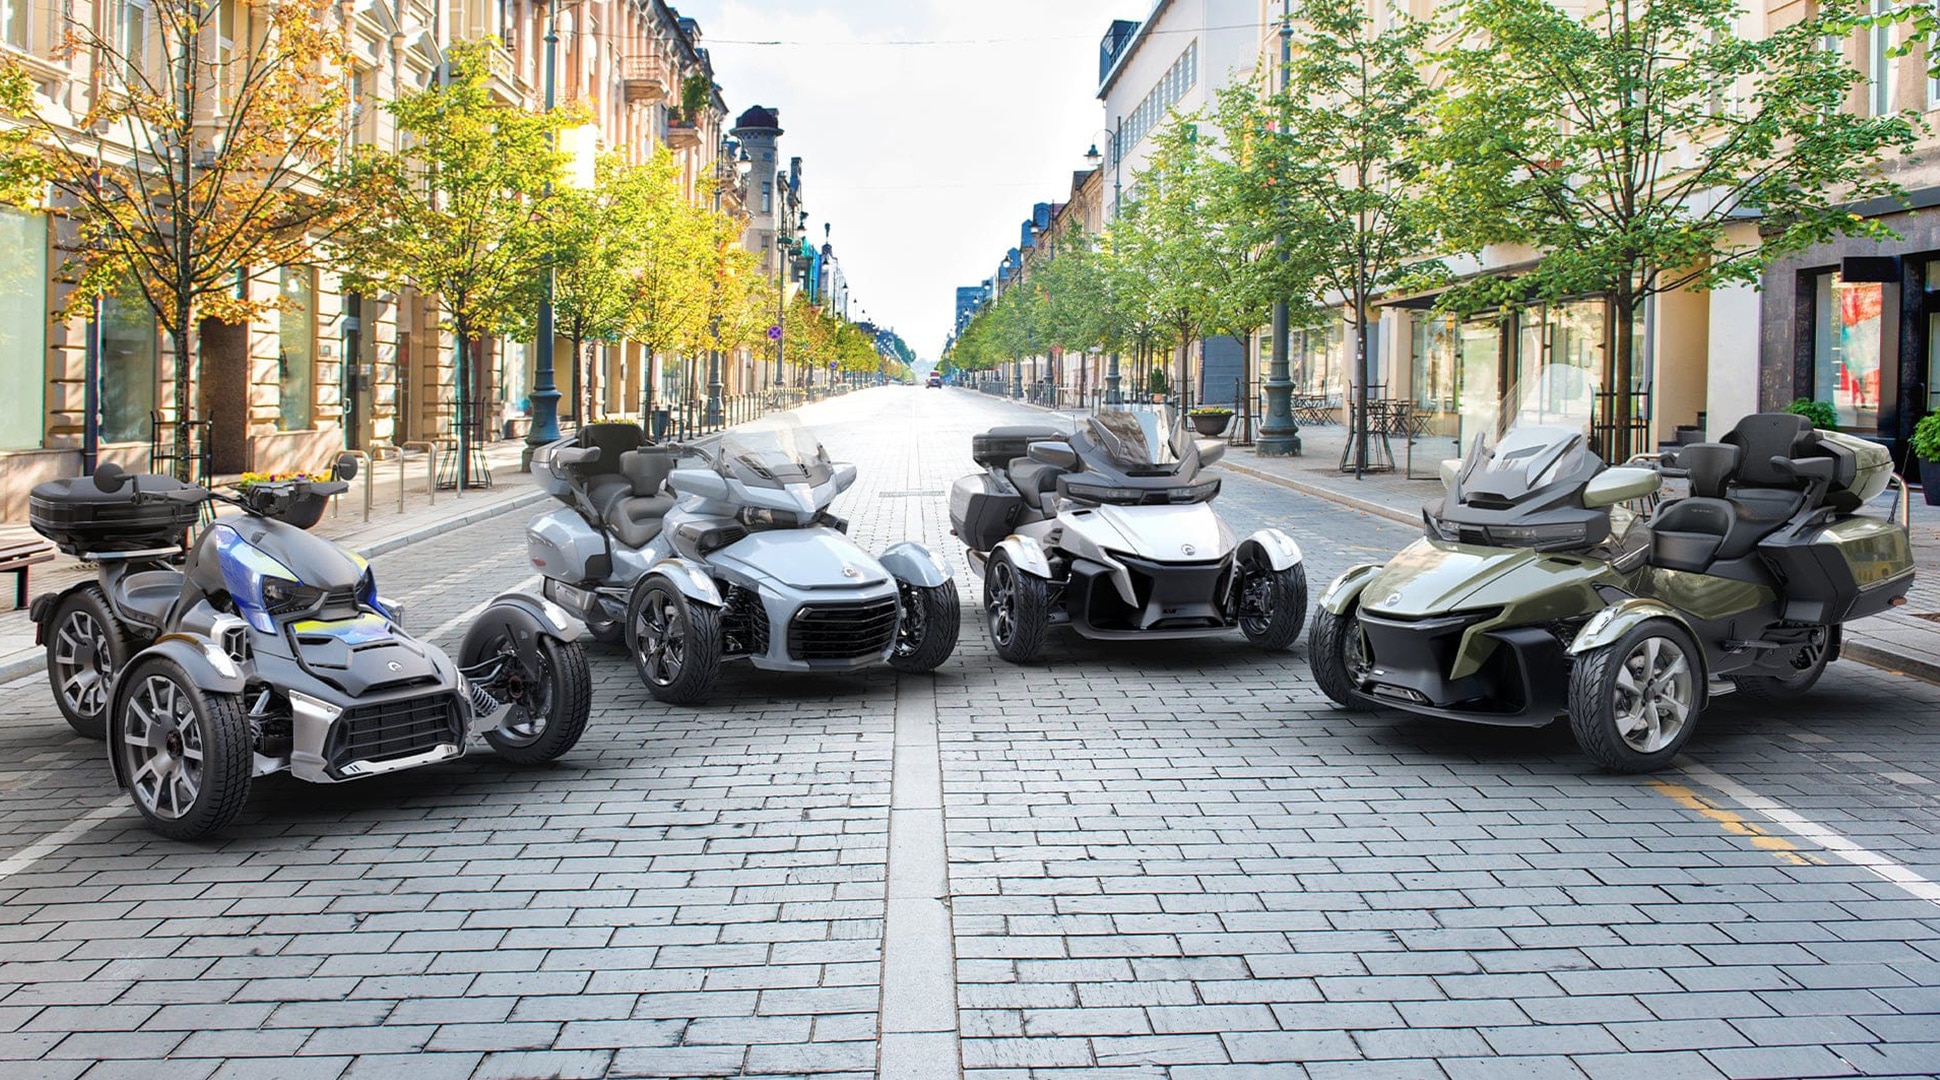 Can-Am On-Road vehicles parked in street